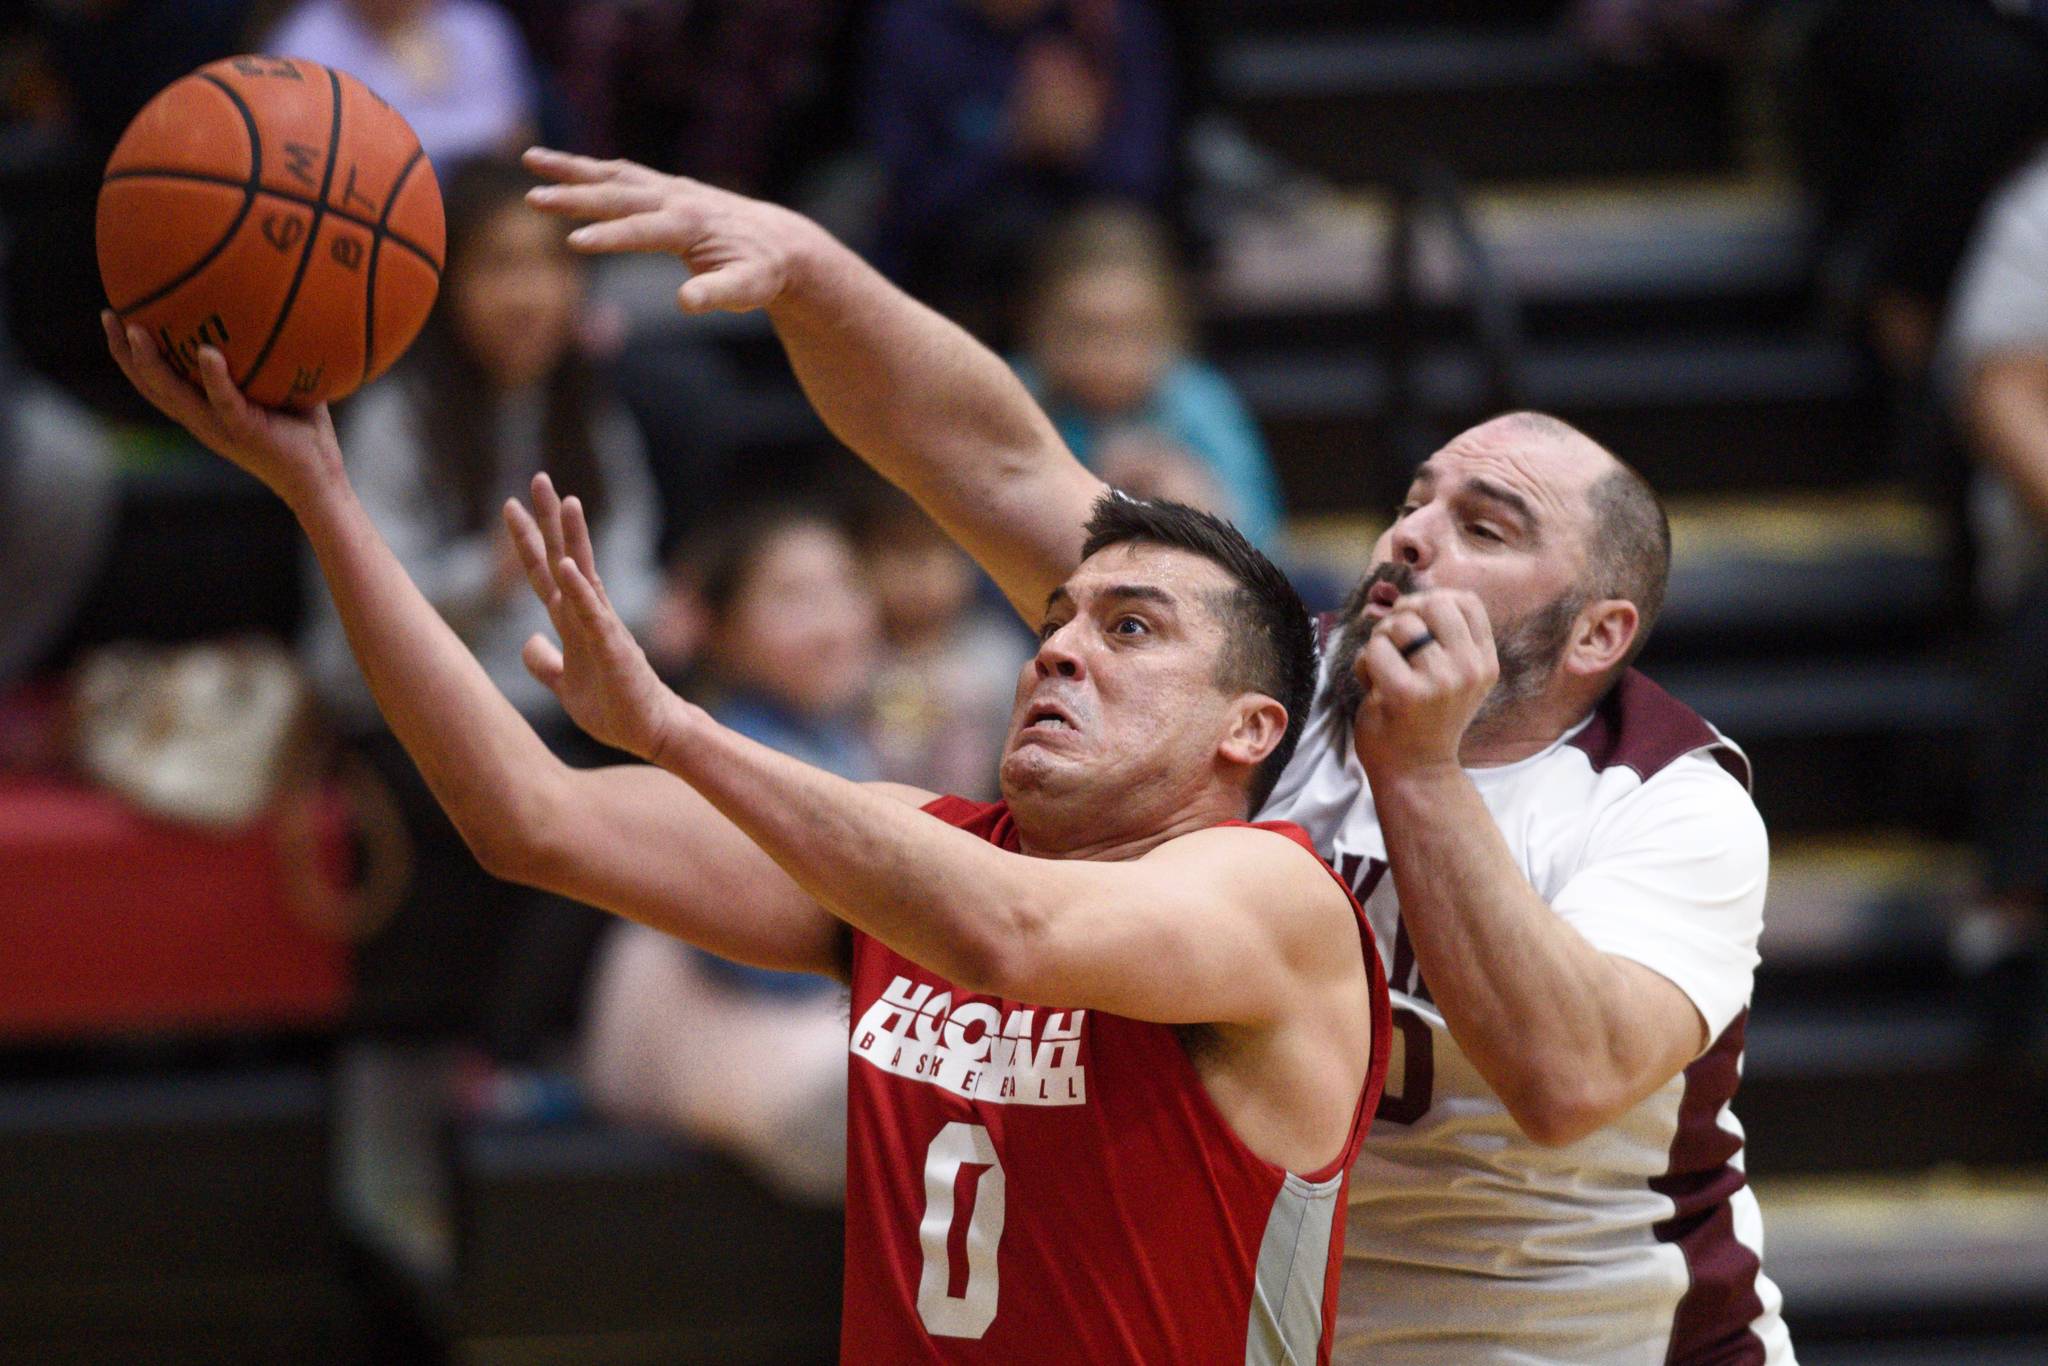 Hoonah’s Anthony Lindoff, left, lays the ball up against Klukwan’s Stuart DeWitt in their C bracket game at the Gold Medal Basketball Tournament on Friday, March 22, 2019. (Michael Penn | Juneau Empire)